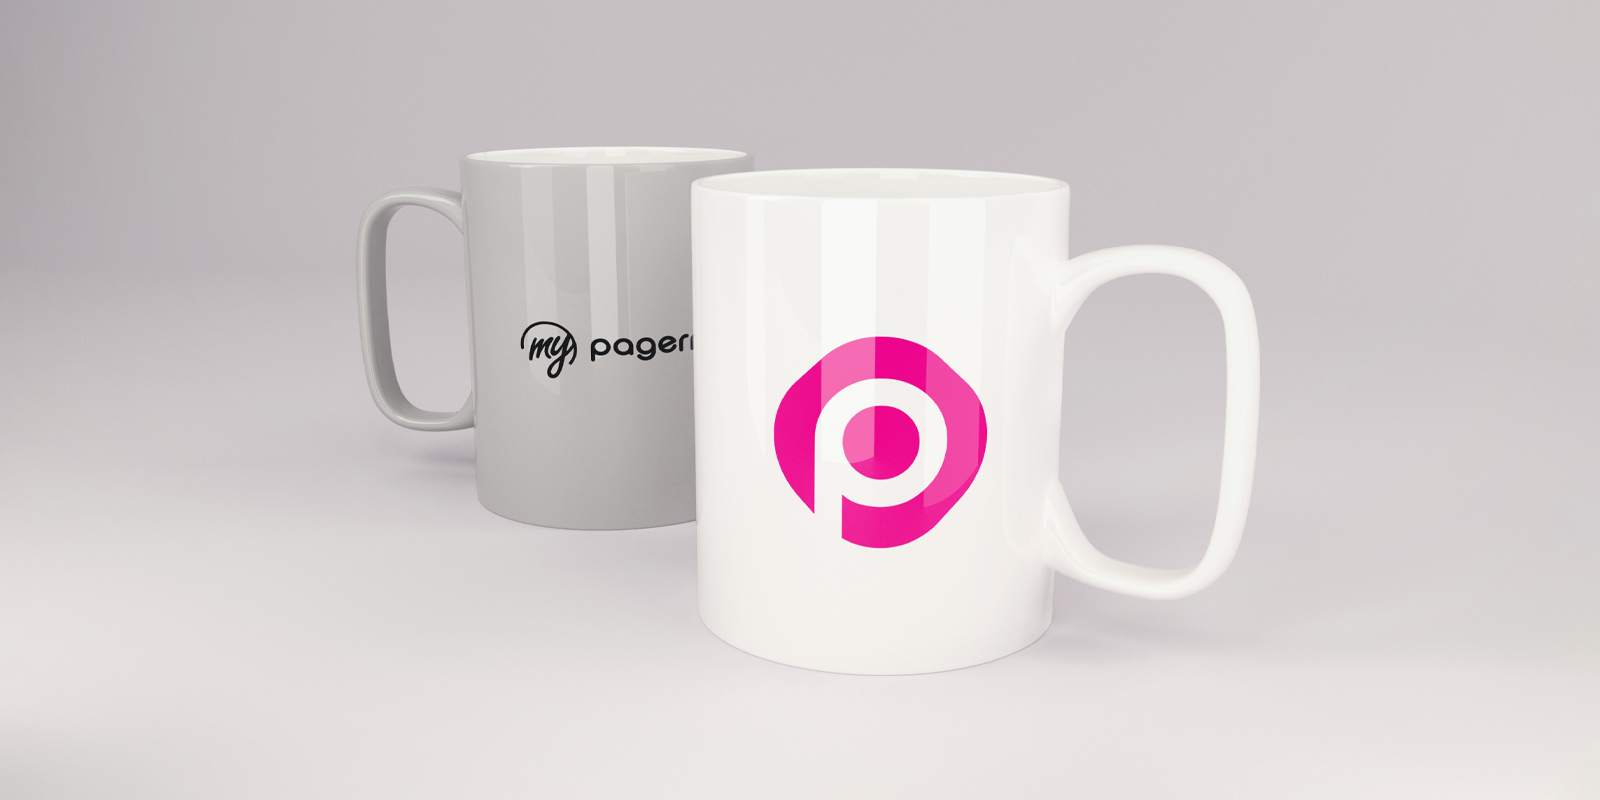 Mugs in Barcelona - Print with Pagerr